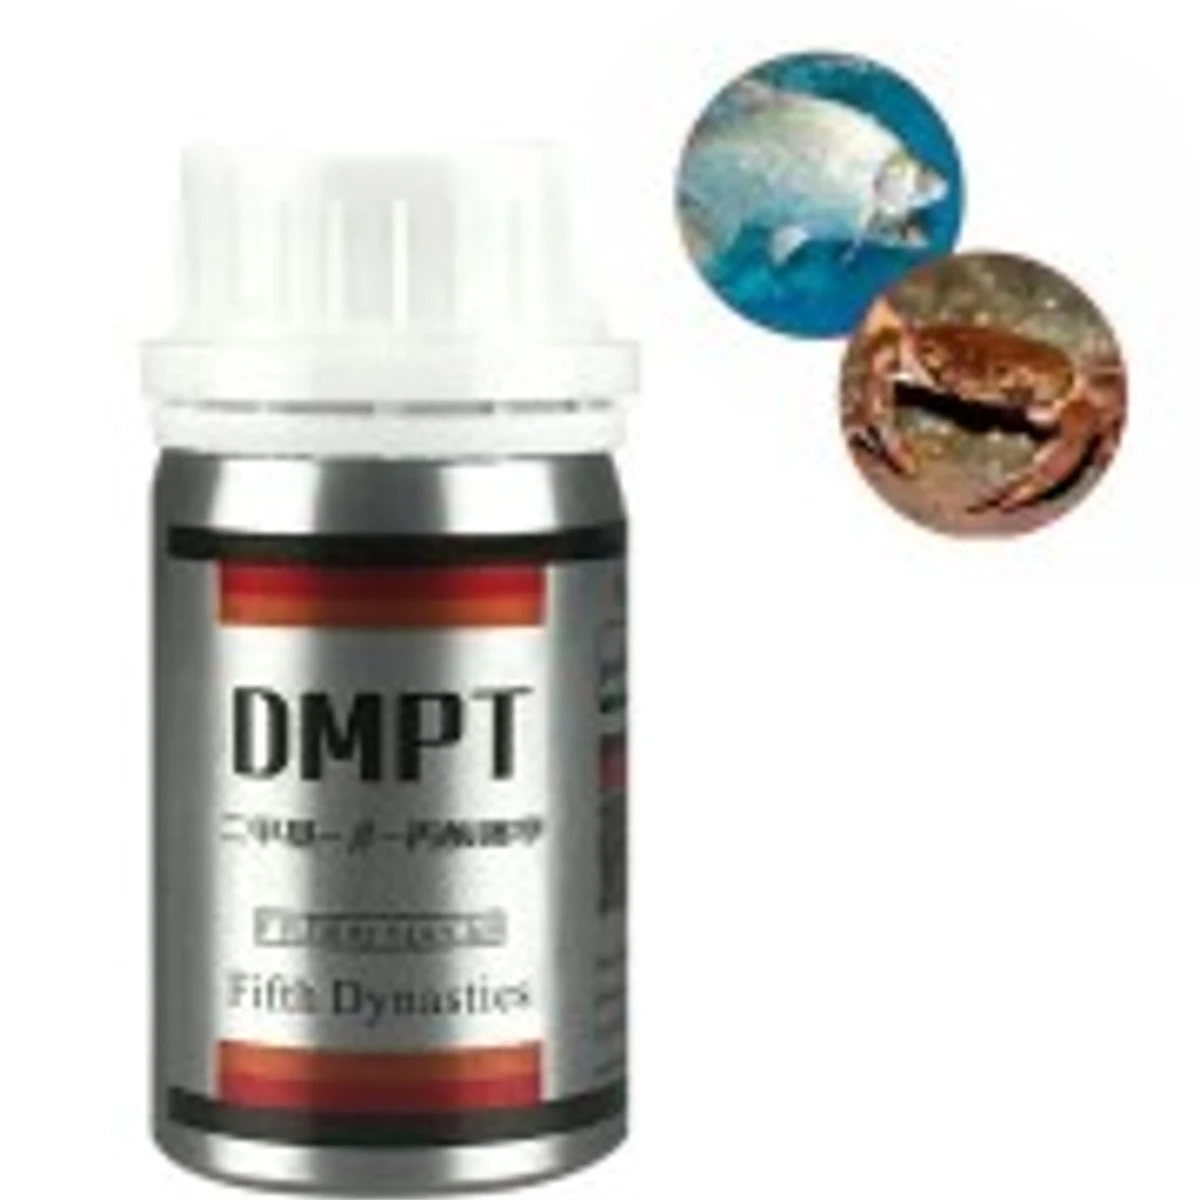 DMPT- Fishing Bait Additive Powder Carp Attractive Smell Lure Tackle Food